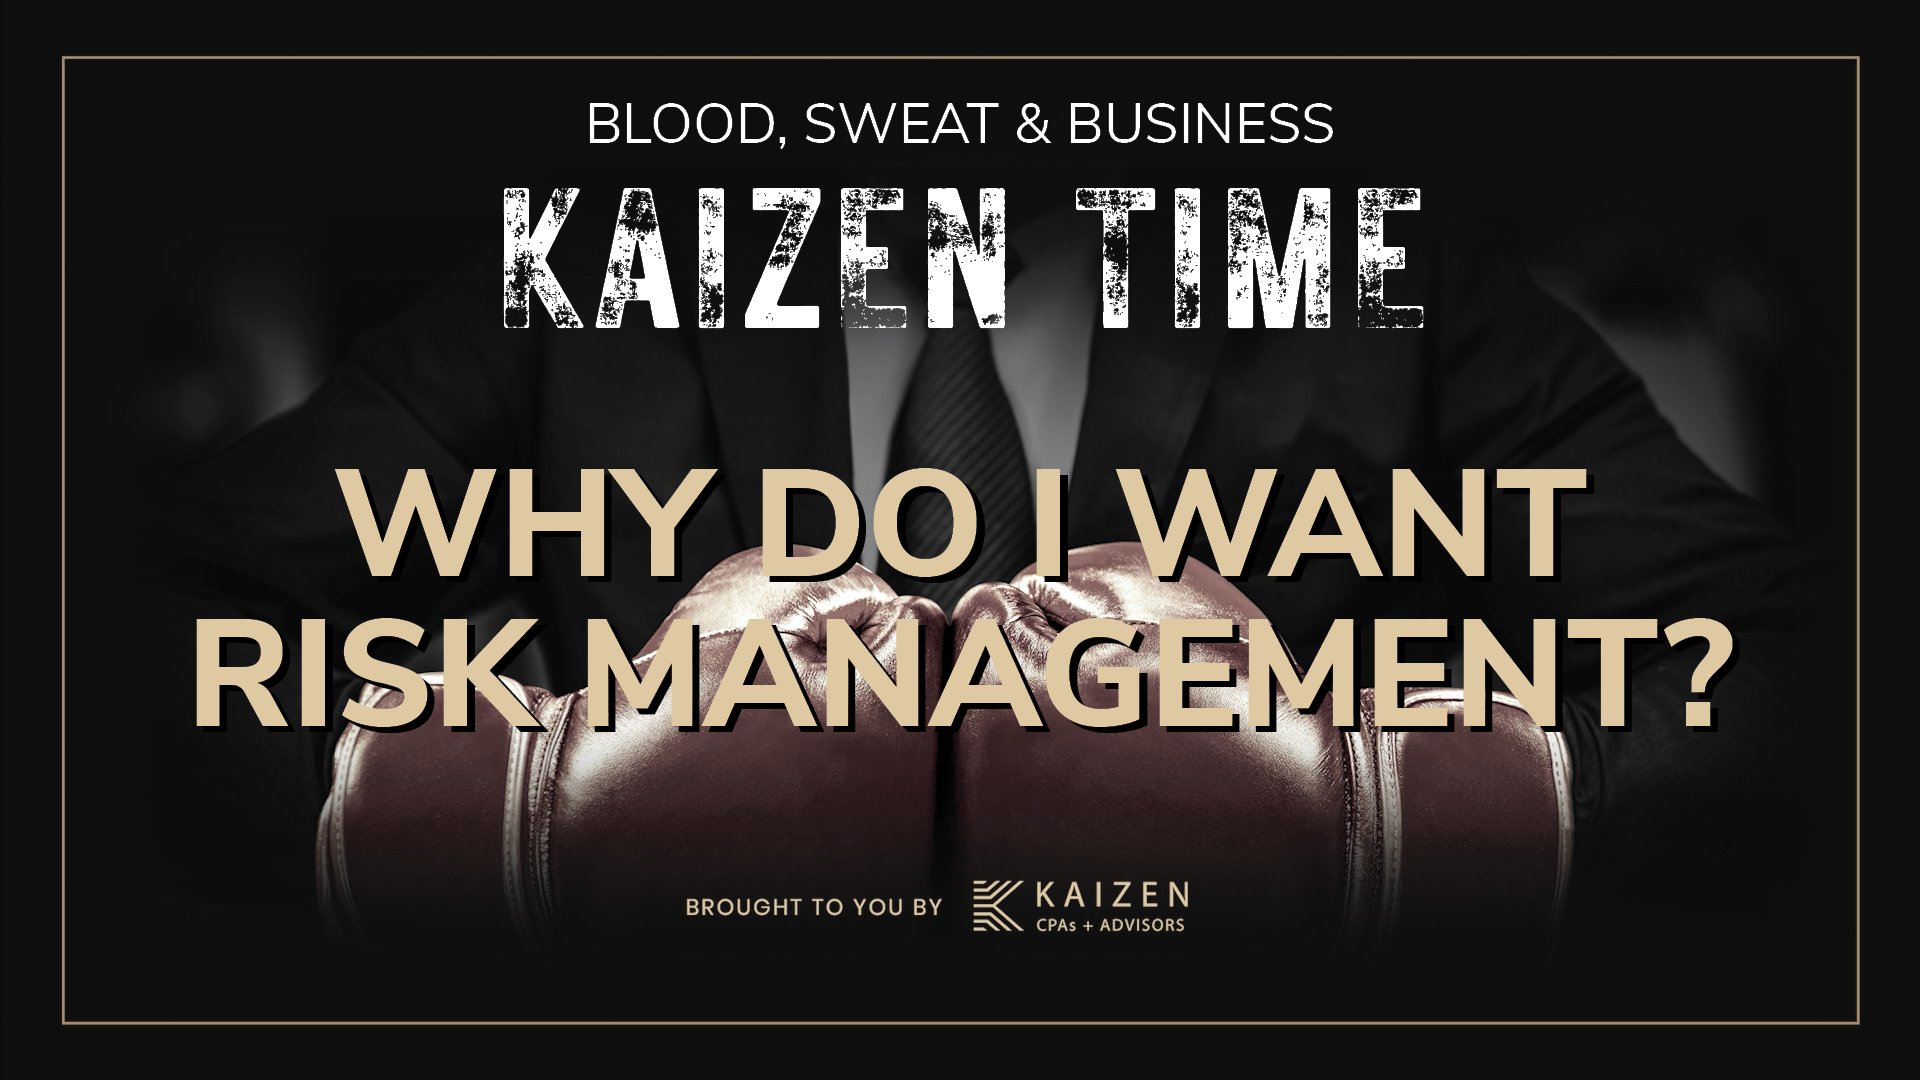 Learn how Kaizen Risk Management offers tailored financial protection, including cybersecurity coverage, without scaring businesses into over-insurance.